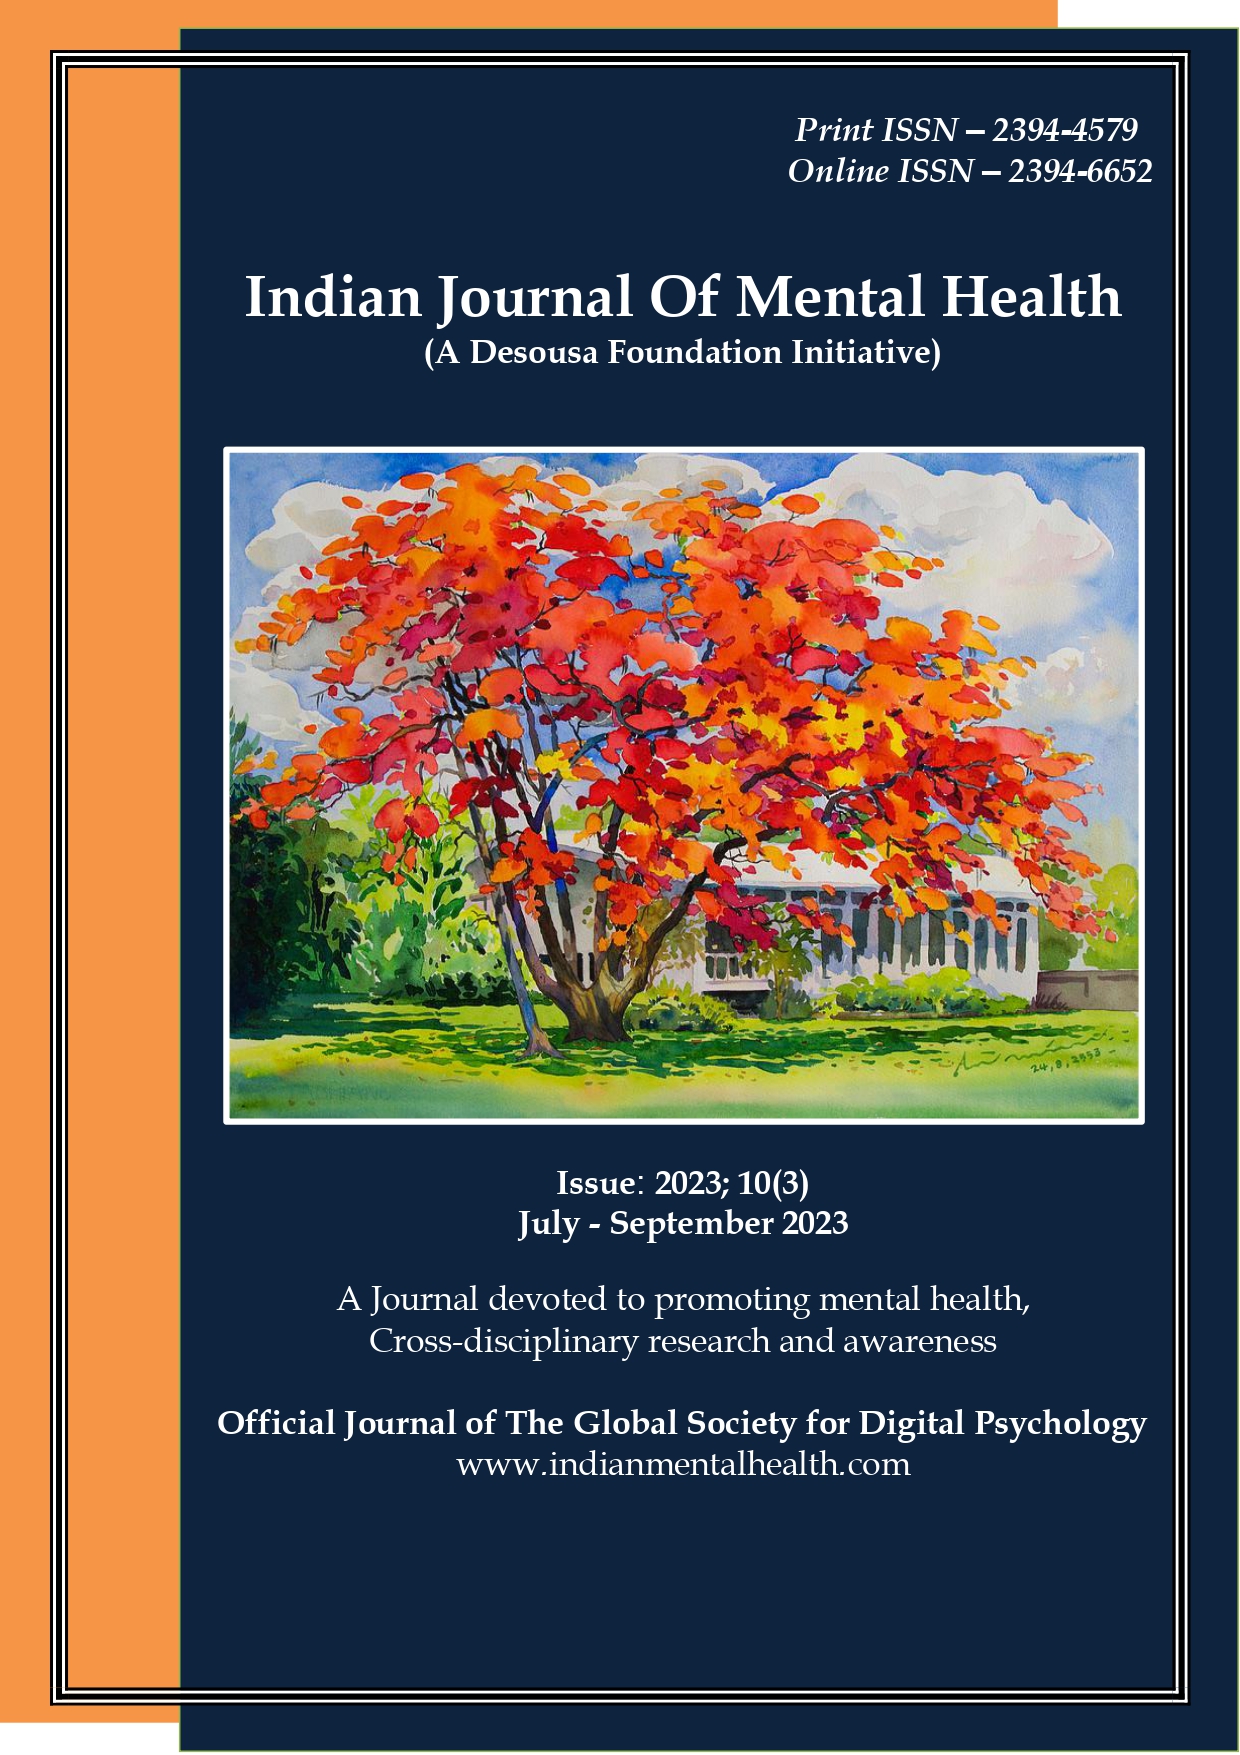 case study on mental health in india